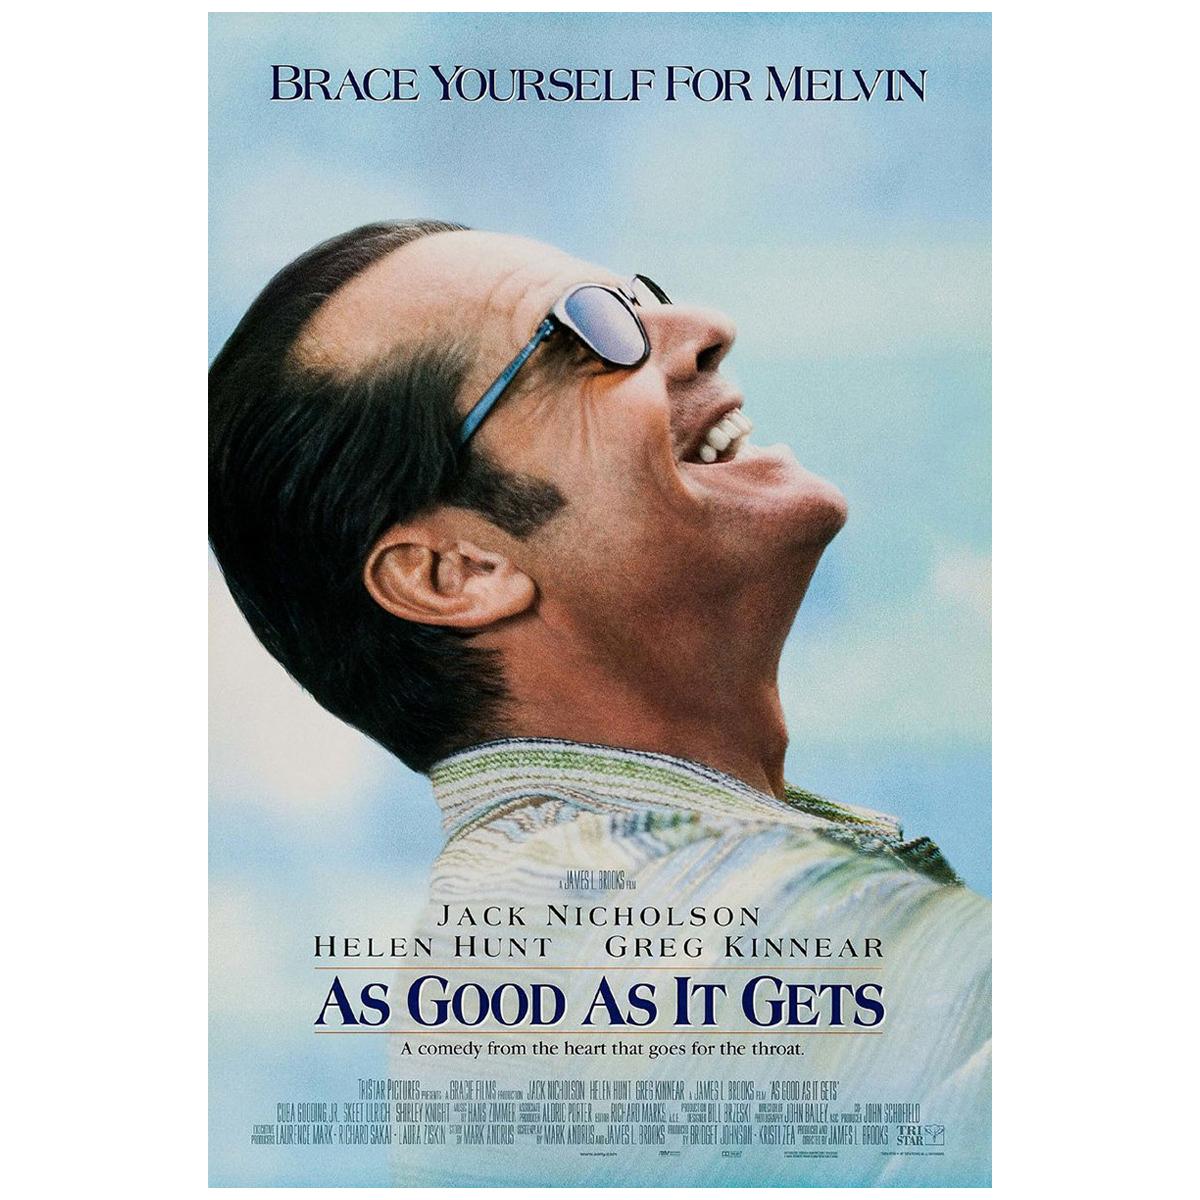 As Good as It Gets movie review (1997)